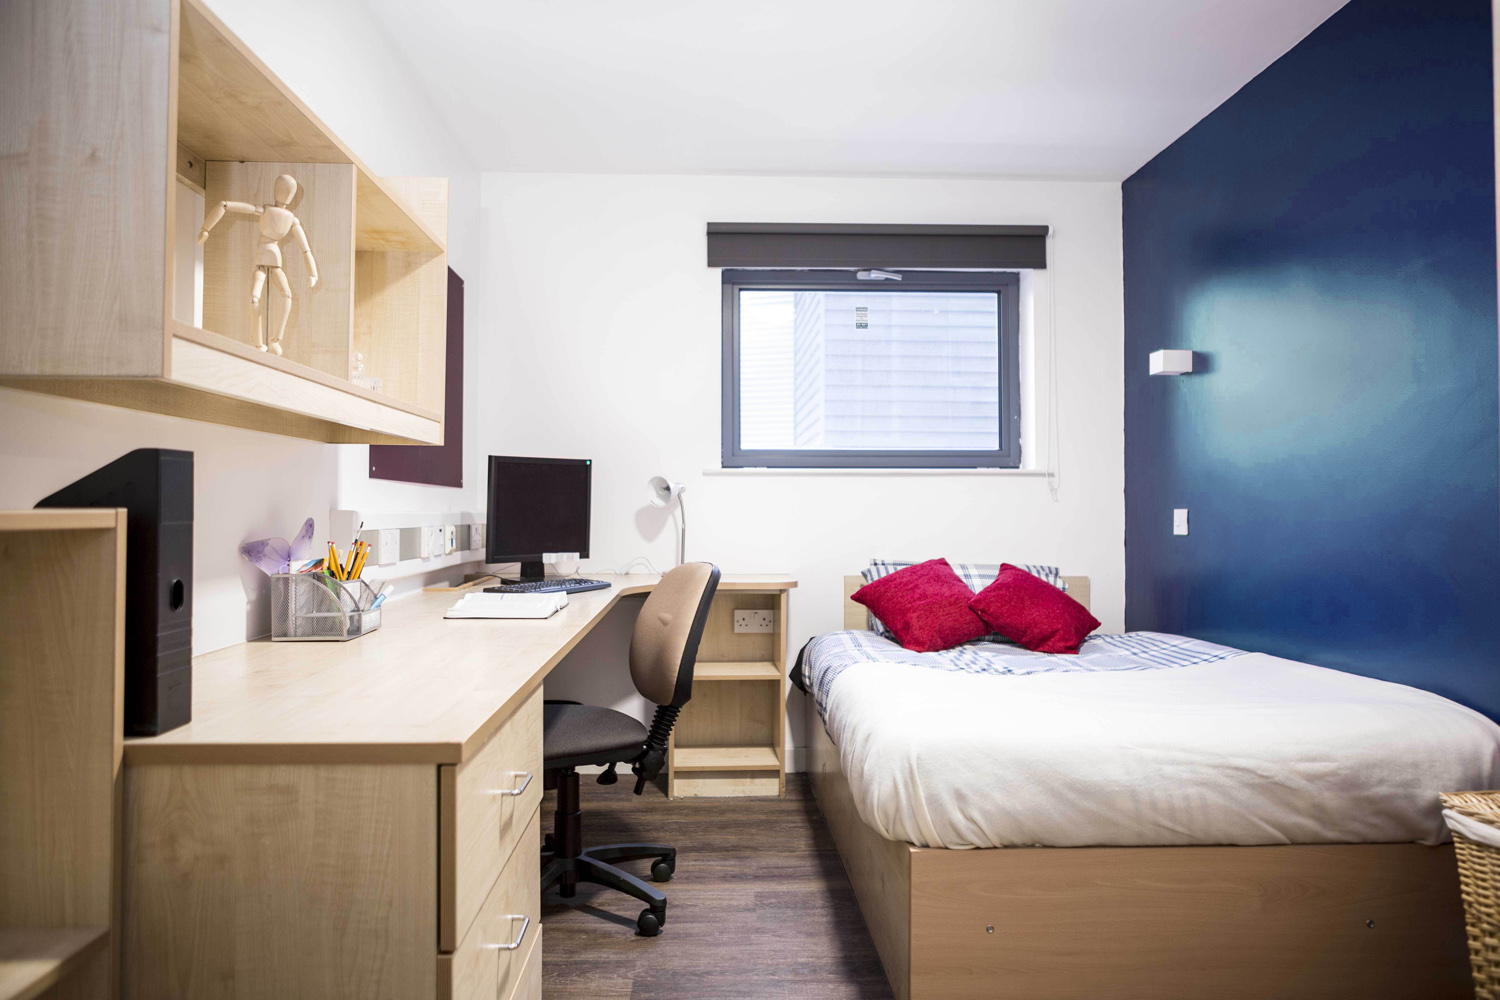 Arena Village bedroom space, a desk lines one wall on the other is a bed against a dark blue feature wall